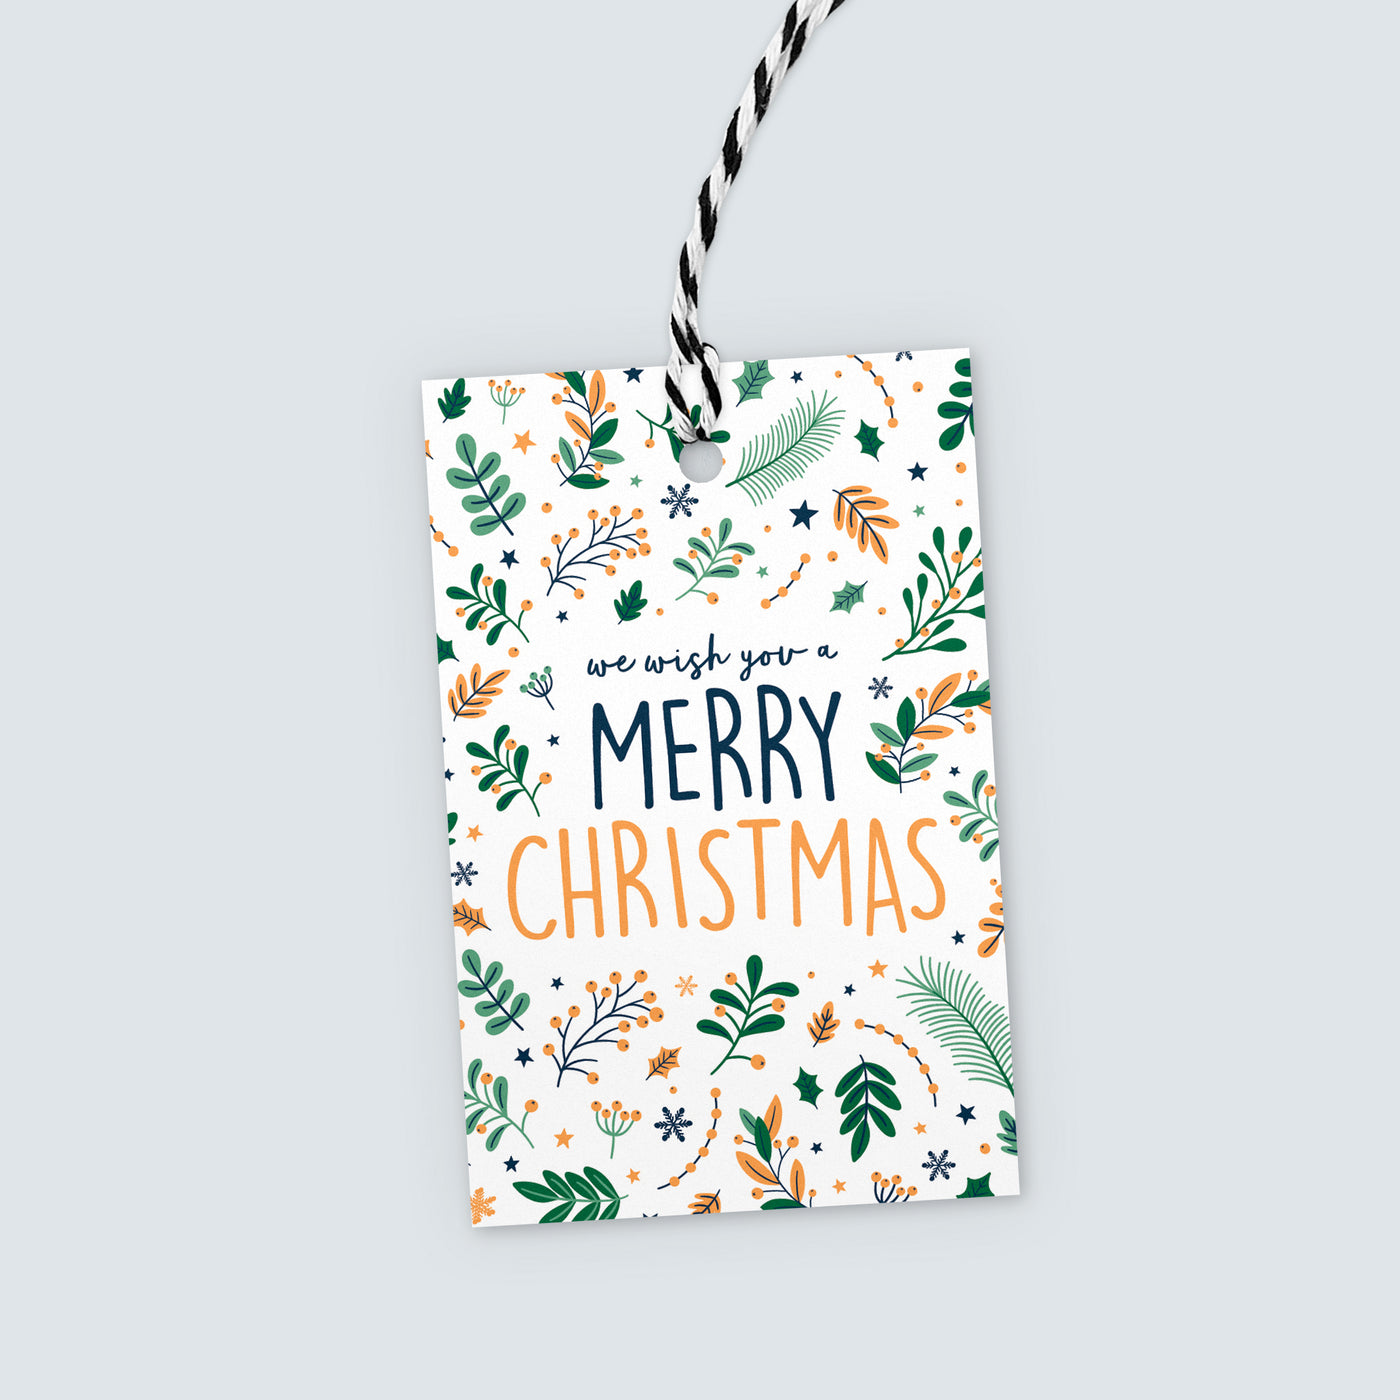 Illustrated Christmas Gift Tags (3 pack)